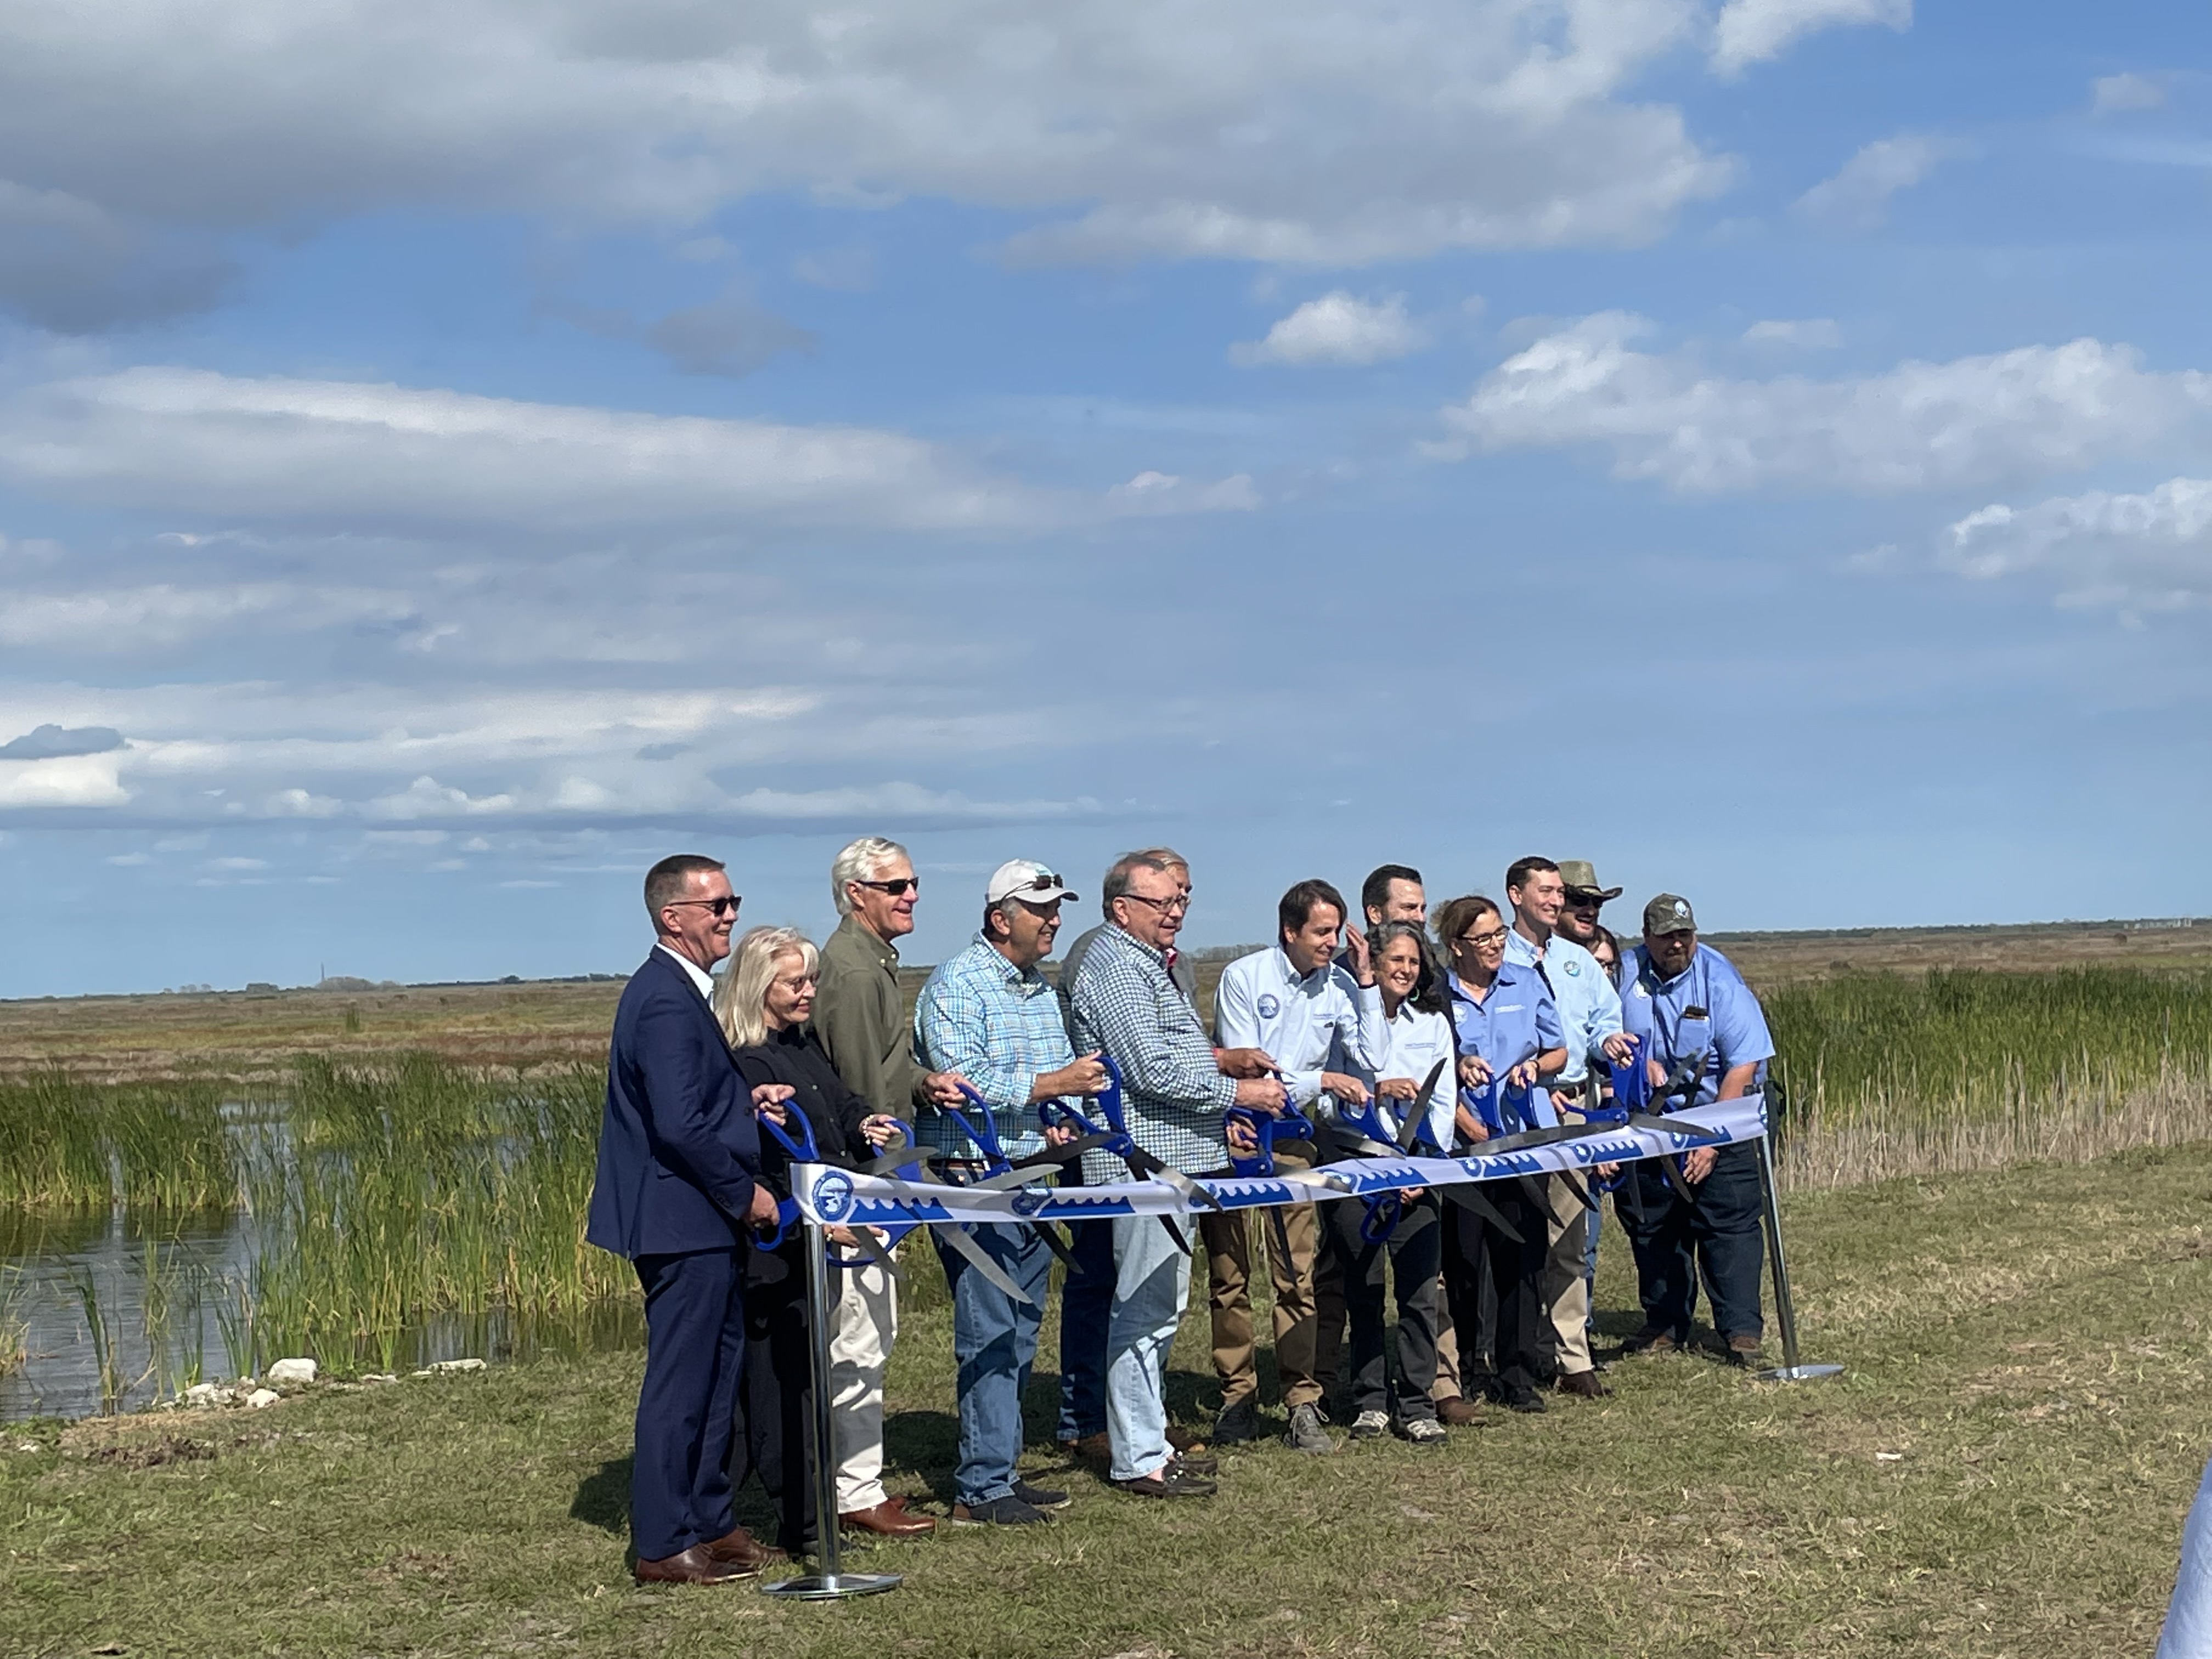 A group of people cutting a ribbon with giant scissors, with a marsh in the background.